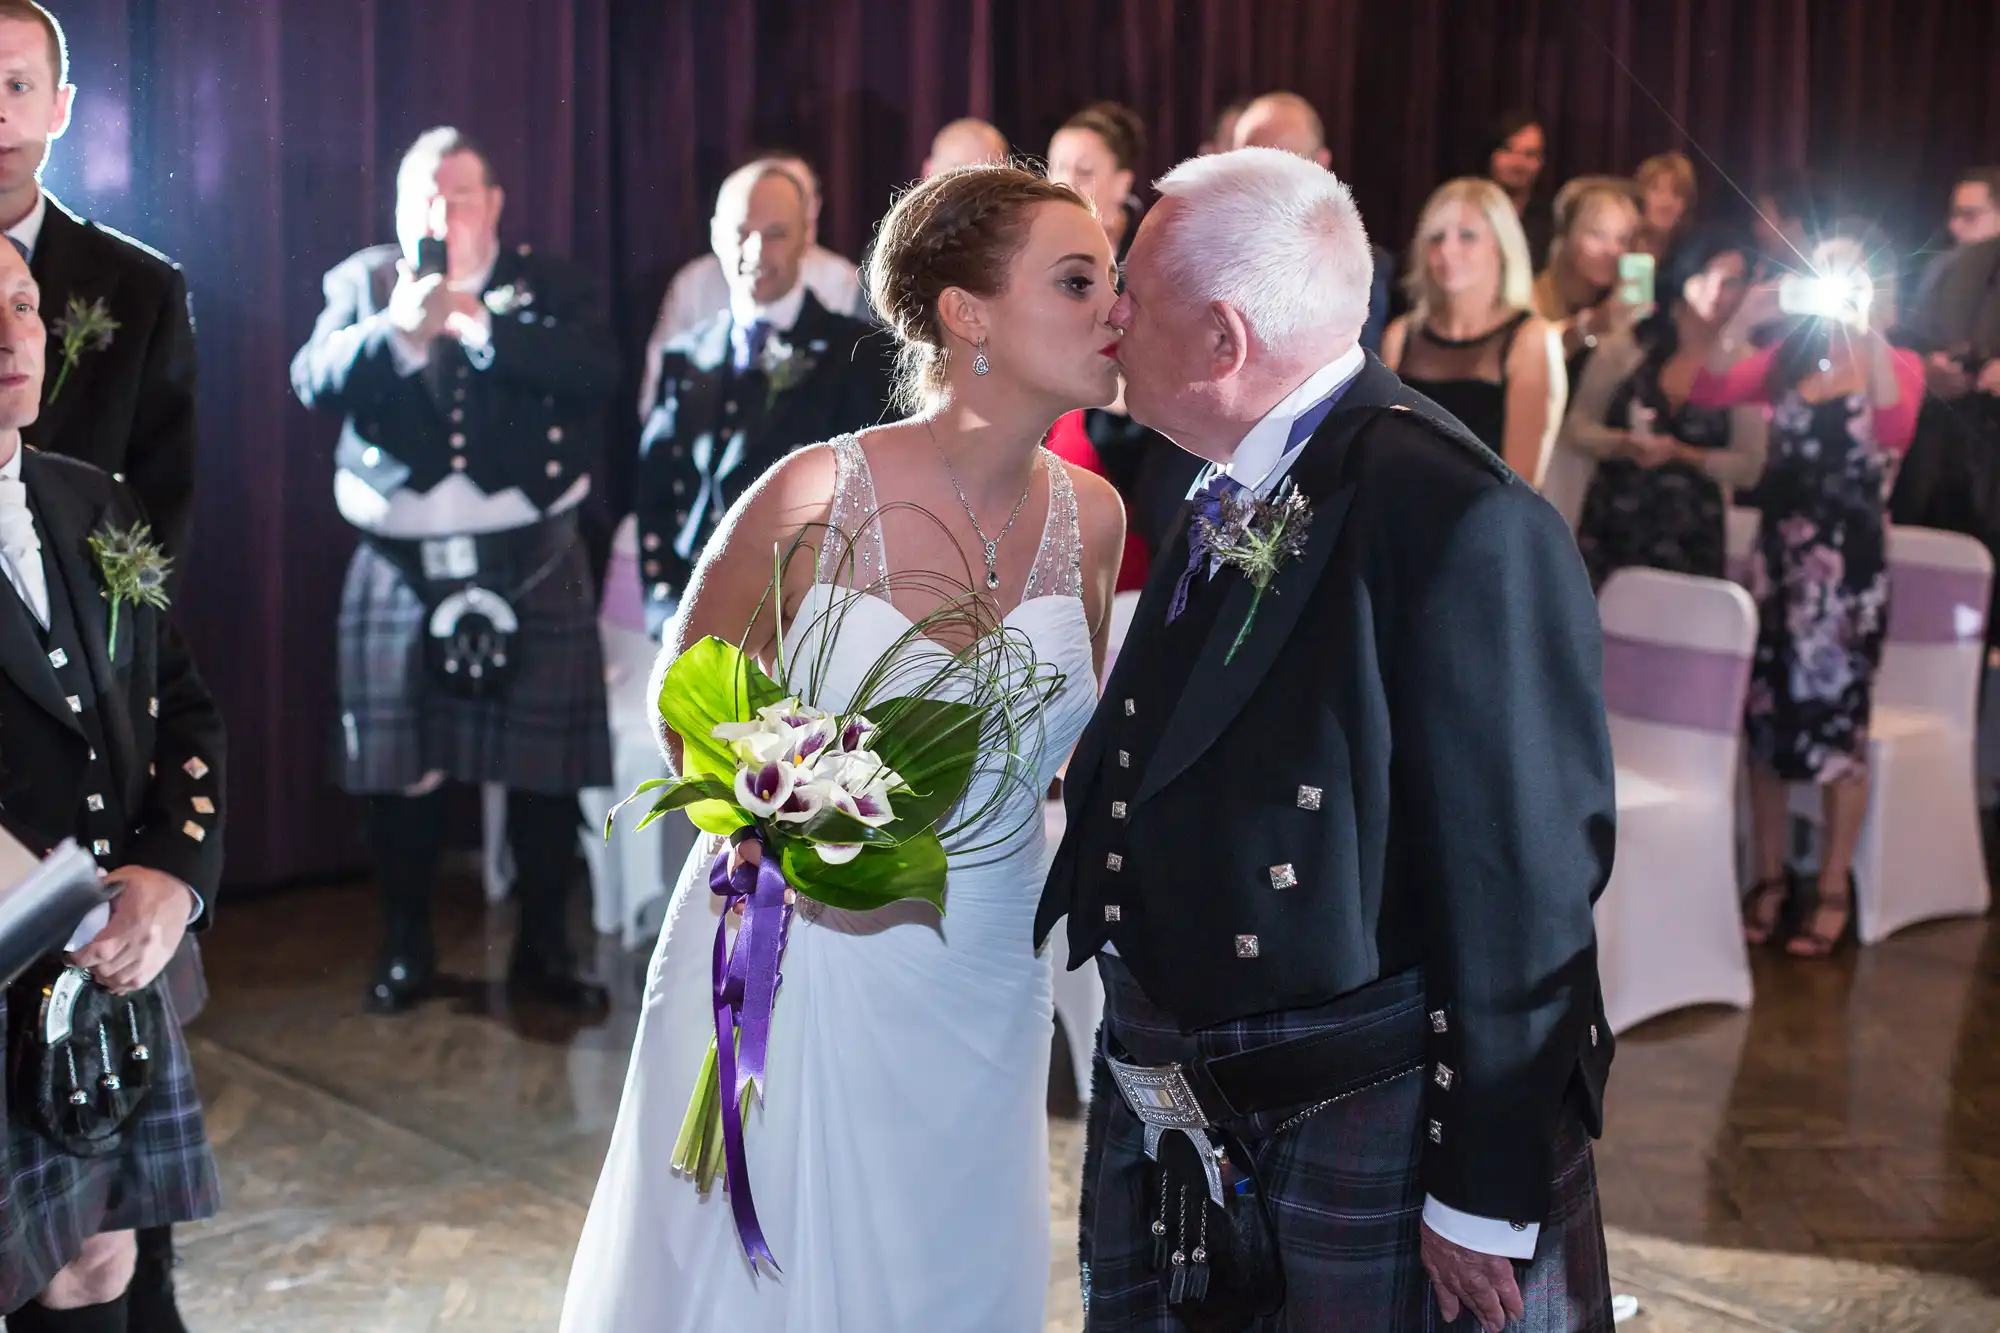 A bride in a white dress kisses an elderly man on the cheek at a wedding reception, surrounded by guests in formal attire, some wearing kilts.